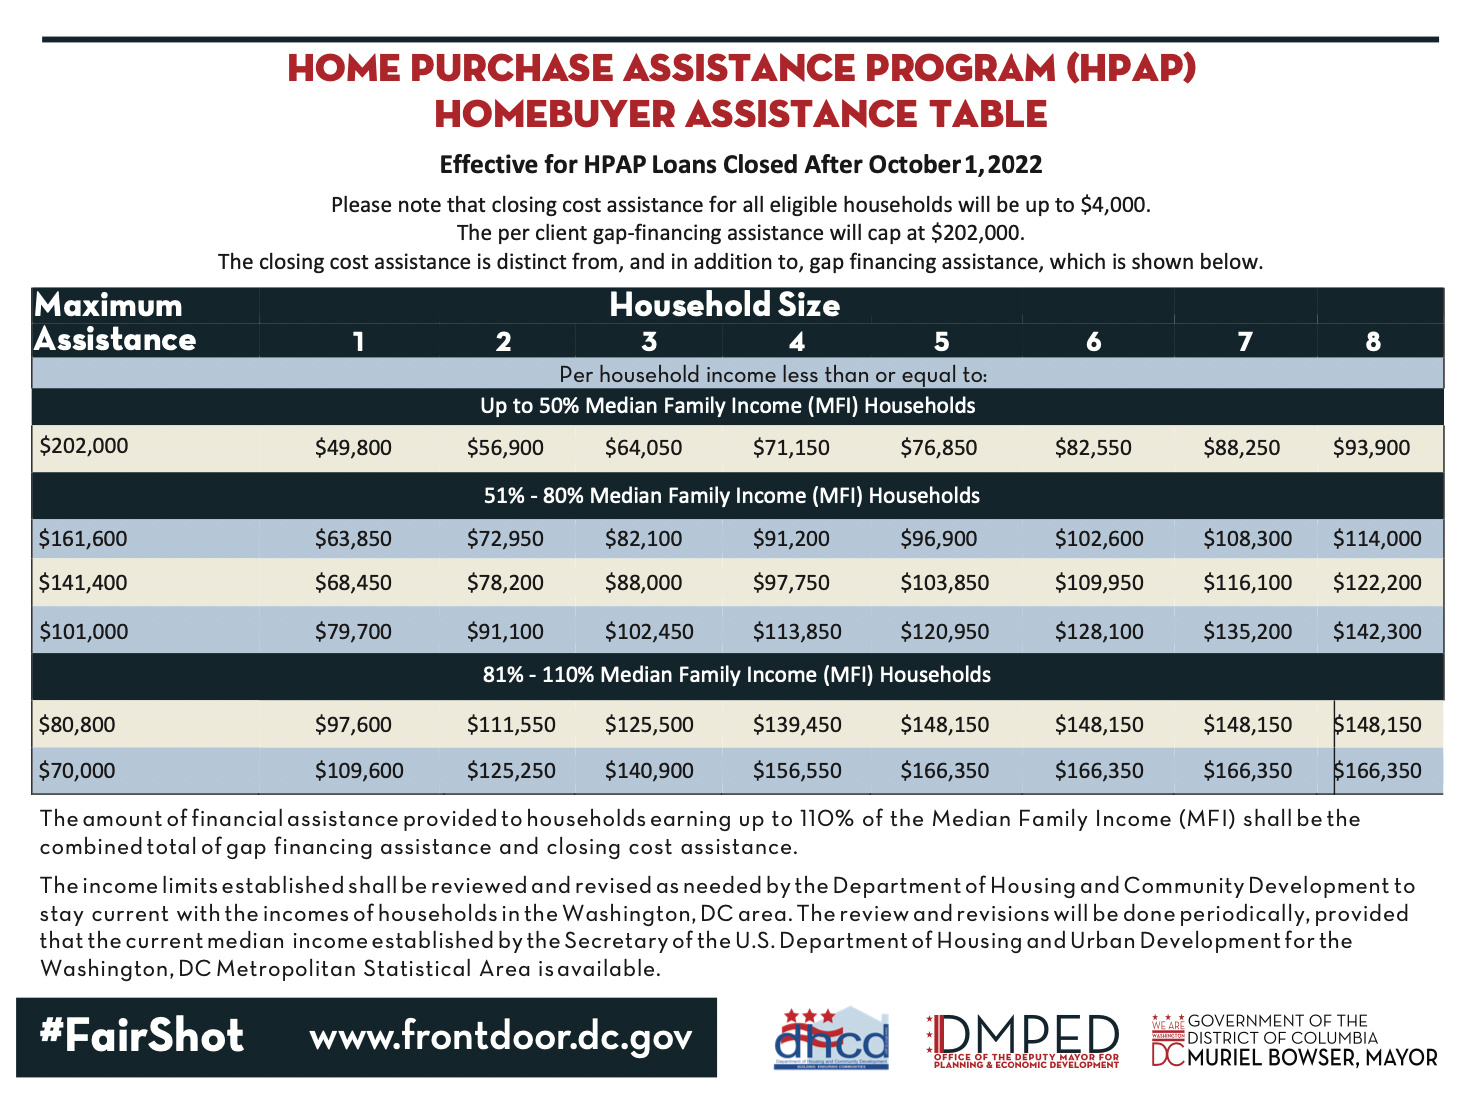 Home Purchase Assistance Program Homebuyer Assistance Table